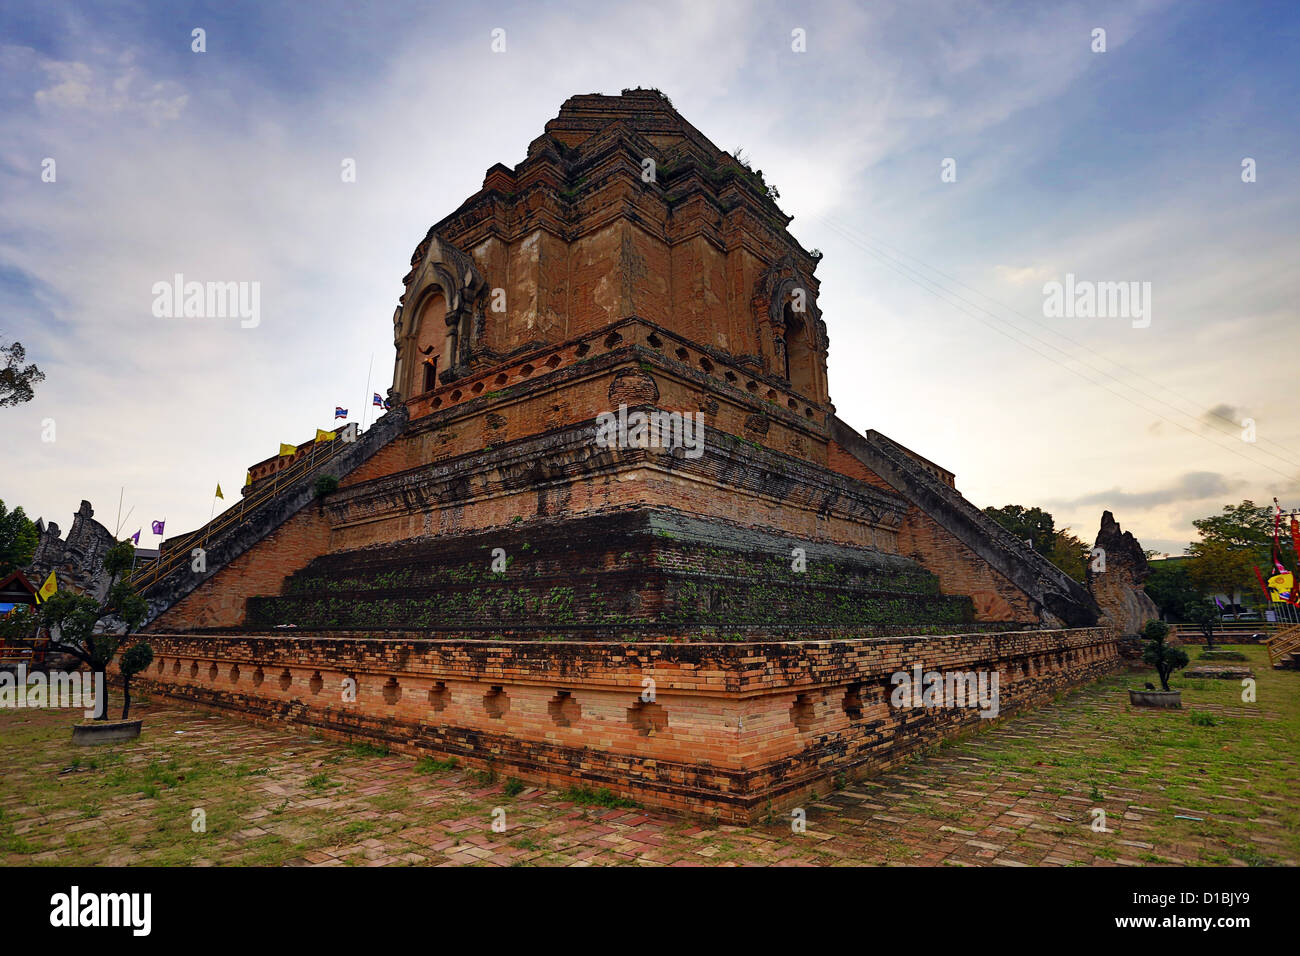 The Stupa at the Wat Chedi Luang temple, Chiang Mai, Thailand Stock Photo